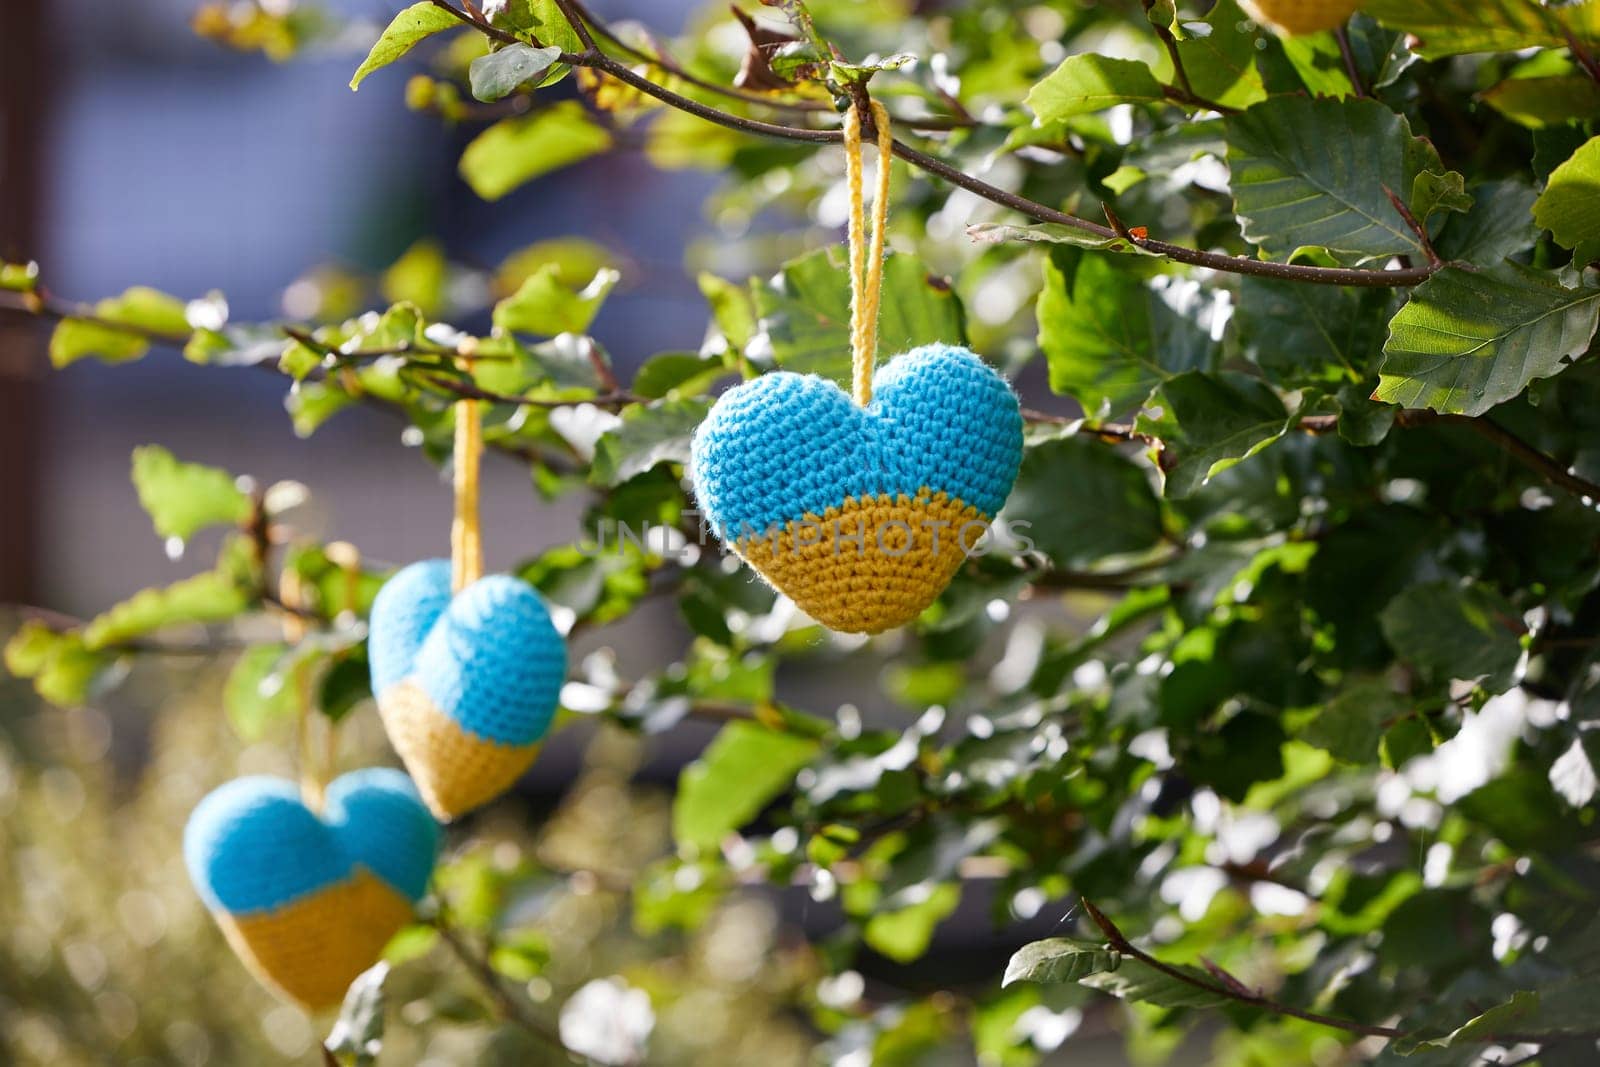 Knitted heart toys in the shape of the flag of Ukraine.